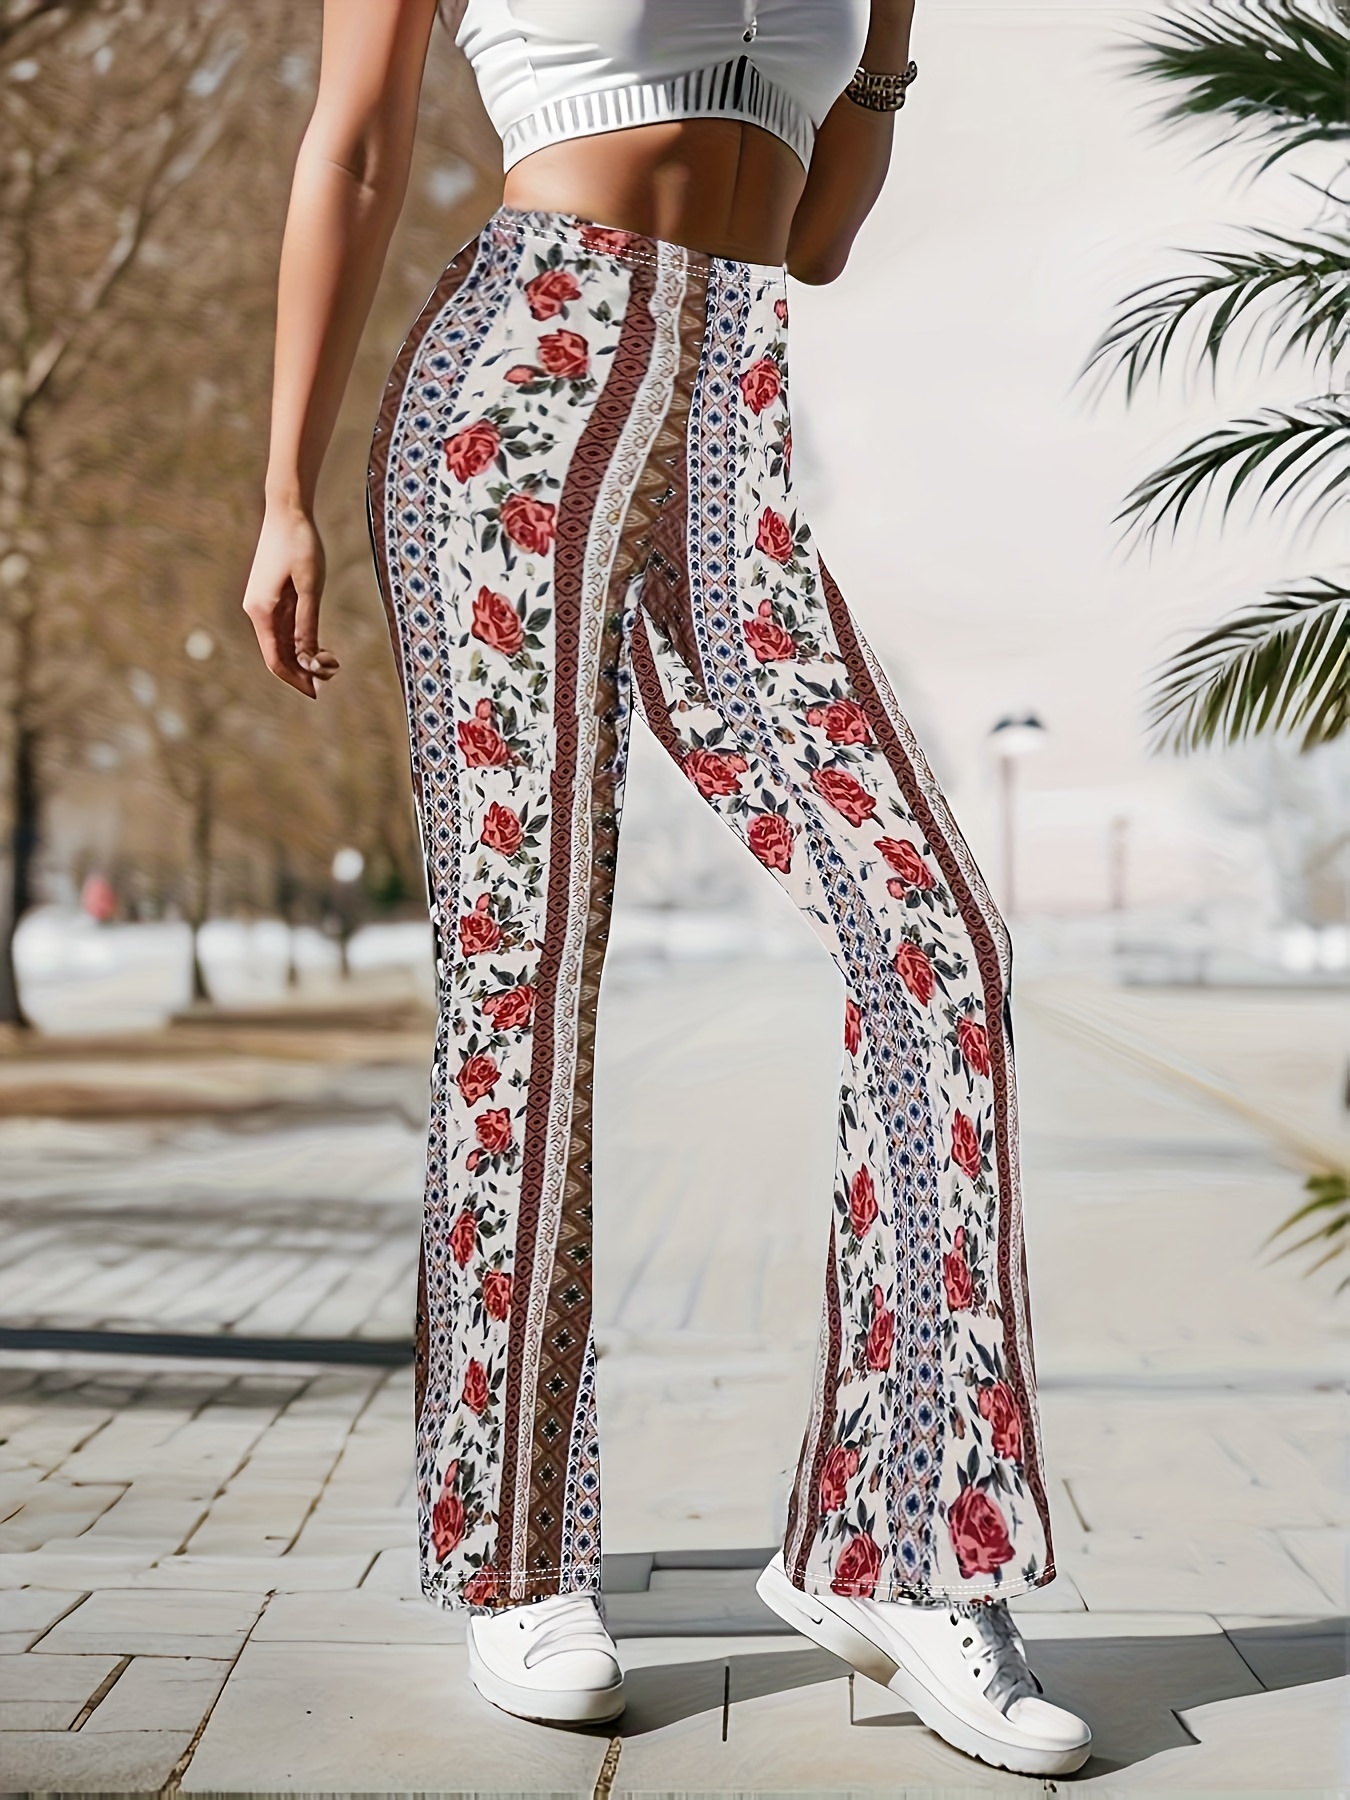 Boho Flare Pants, Elastic Waist Wide Leg Pants for Women Summer Printed  Stretchy Soft Casual Comfy Slim Trousers